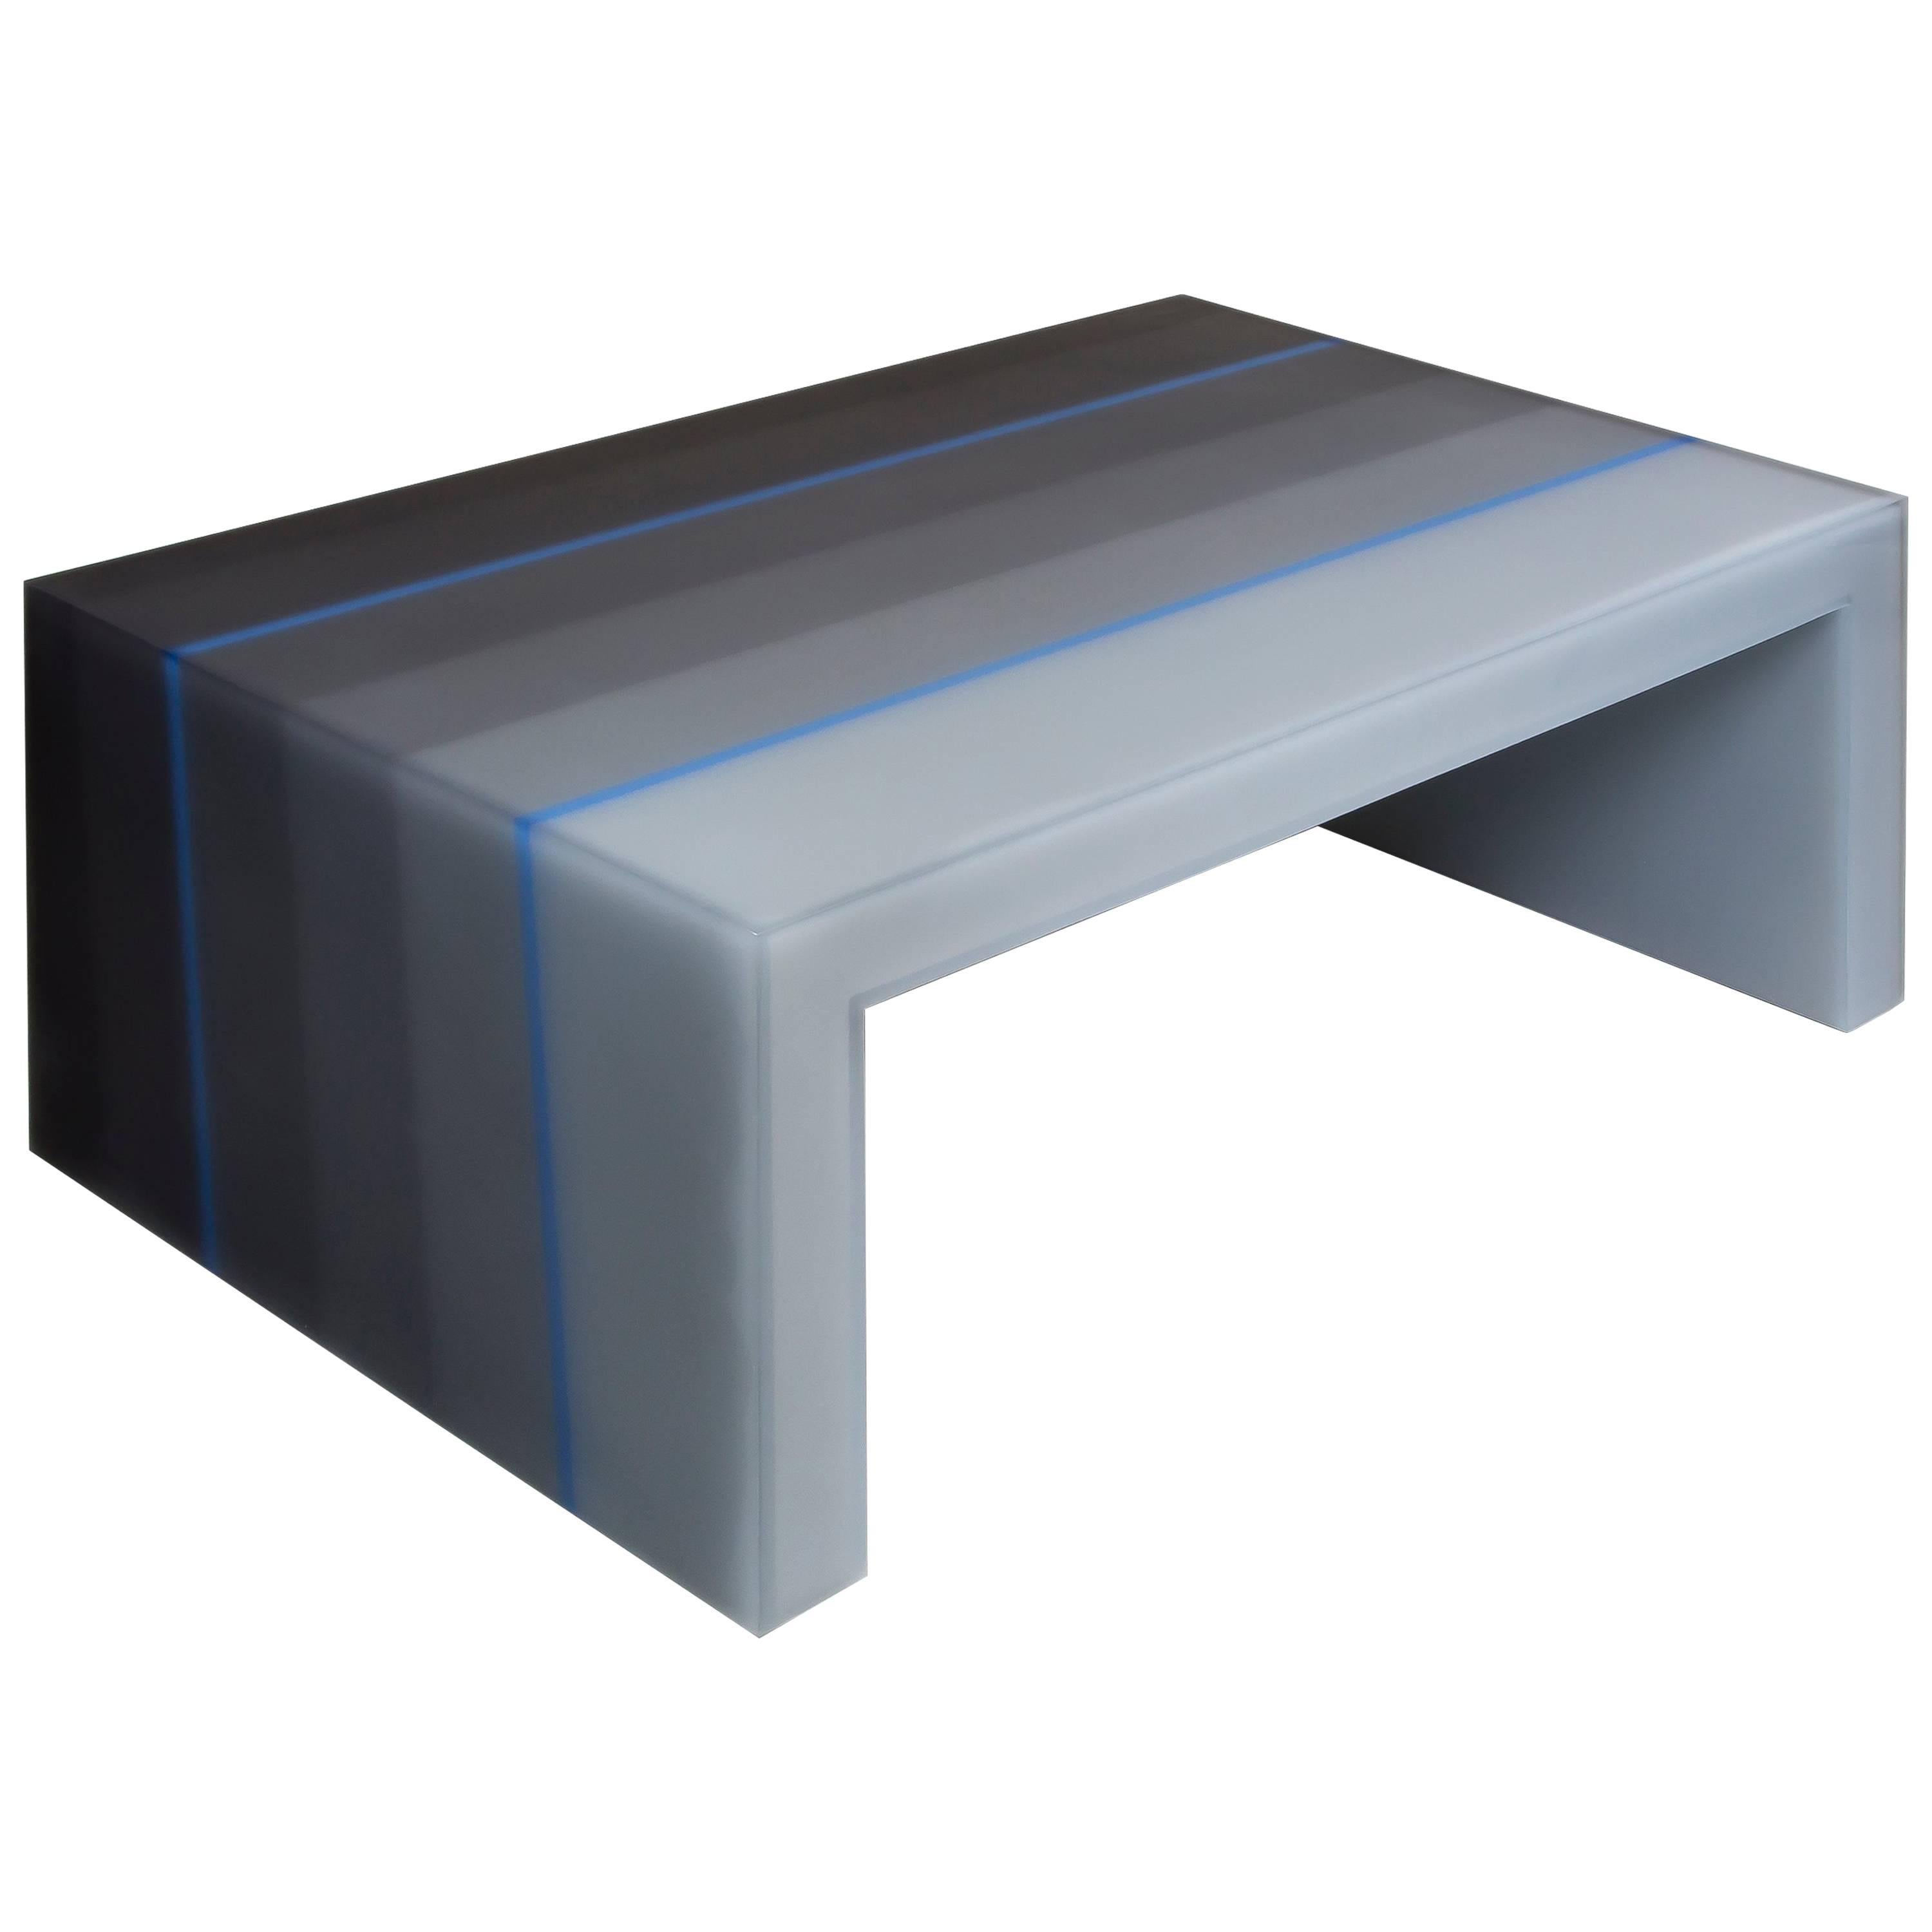  "Coffee Table, Gradient, Gray and Blue Resin", 2017, Facture Studio For Sale